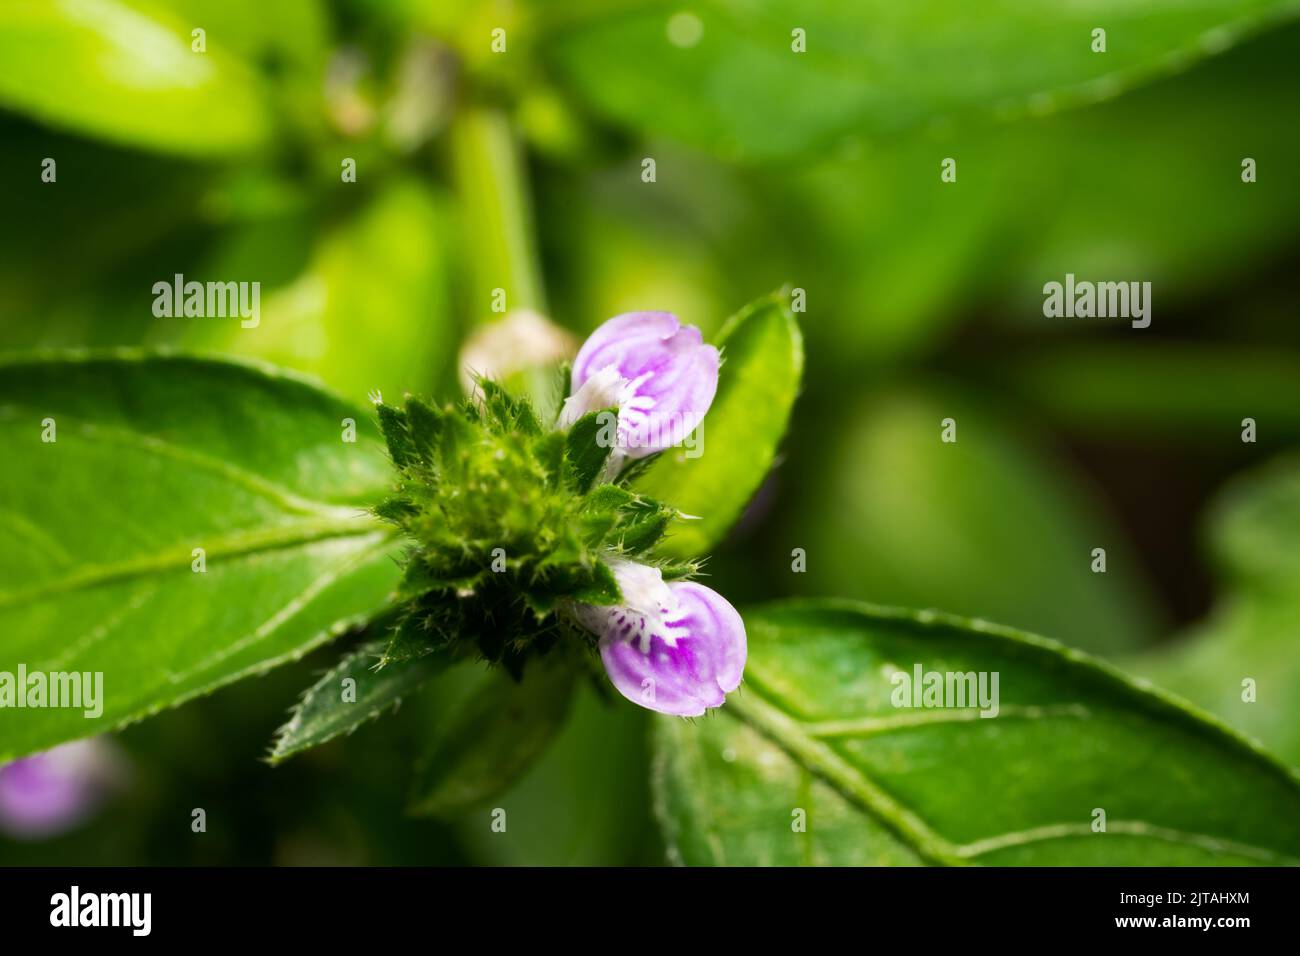 Justicia procumbens flower. Acanthaceae weed Stock Photo